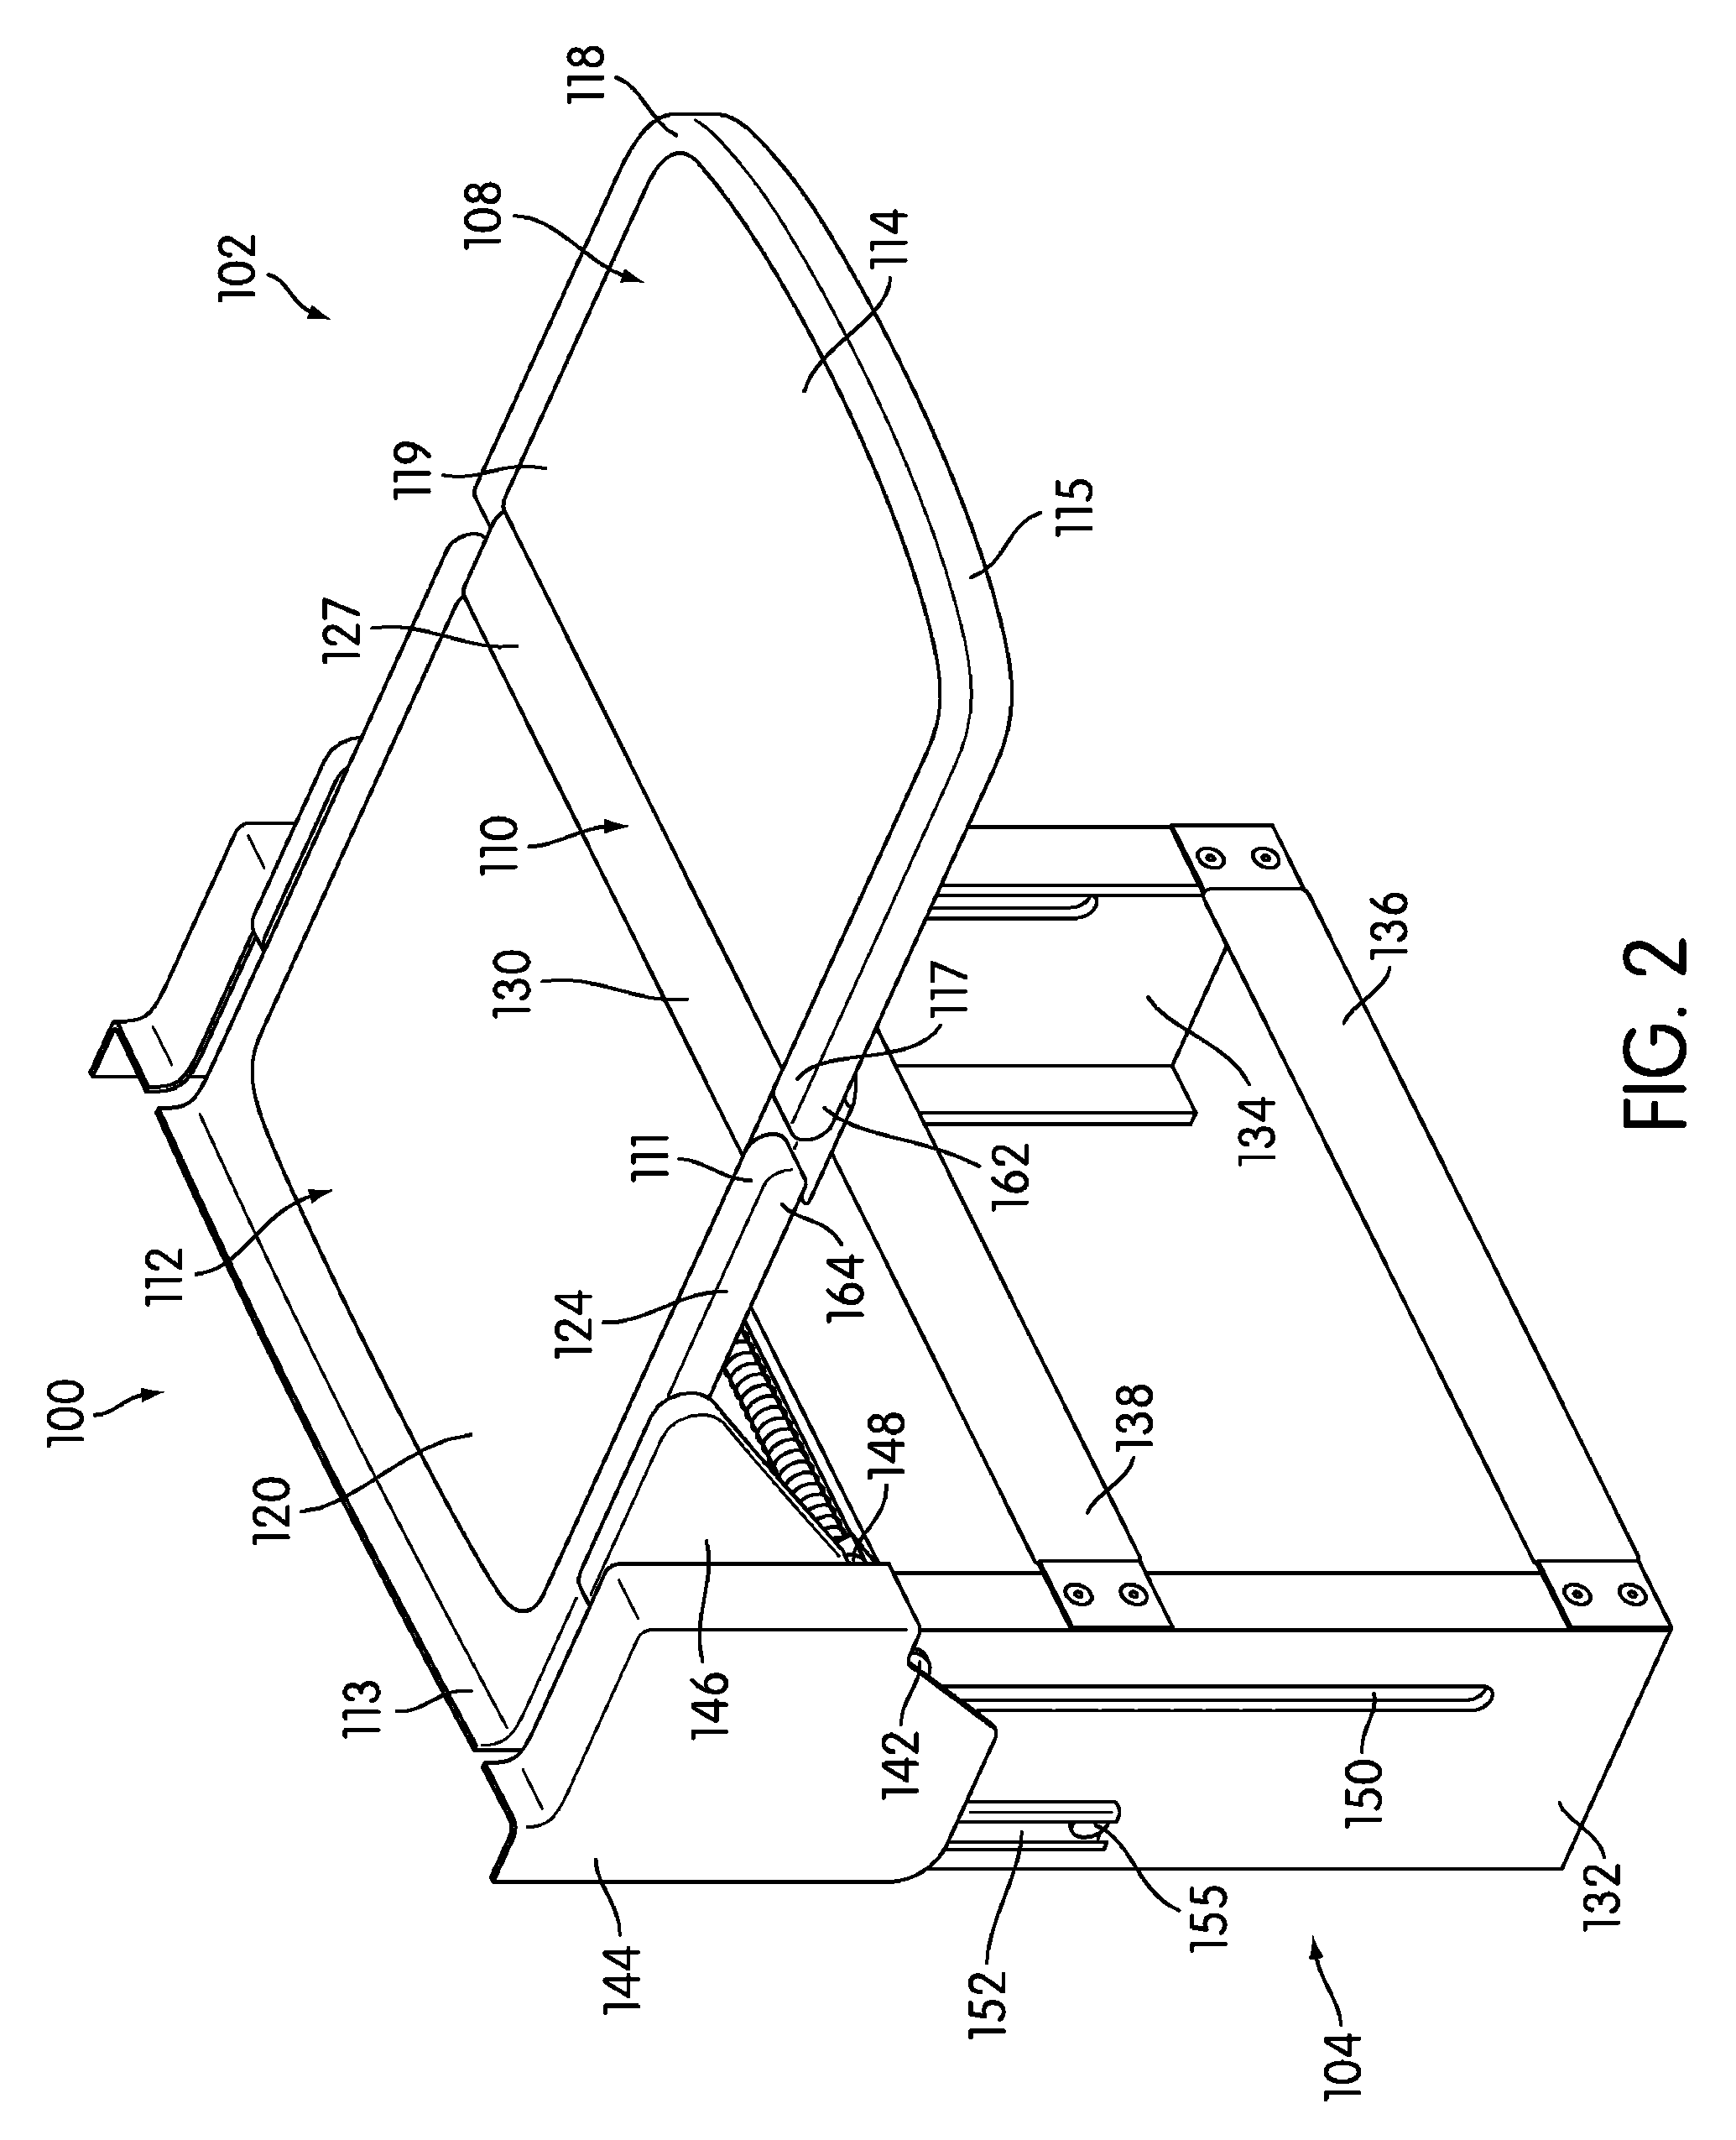 Folding table and support frame assembly